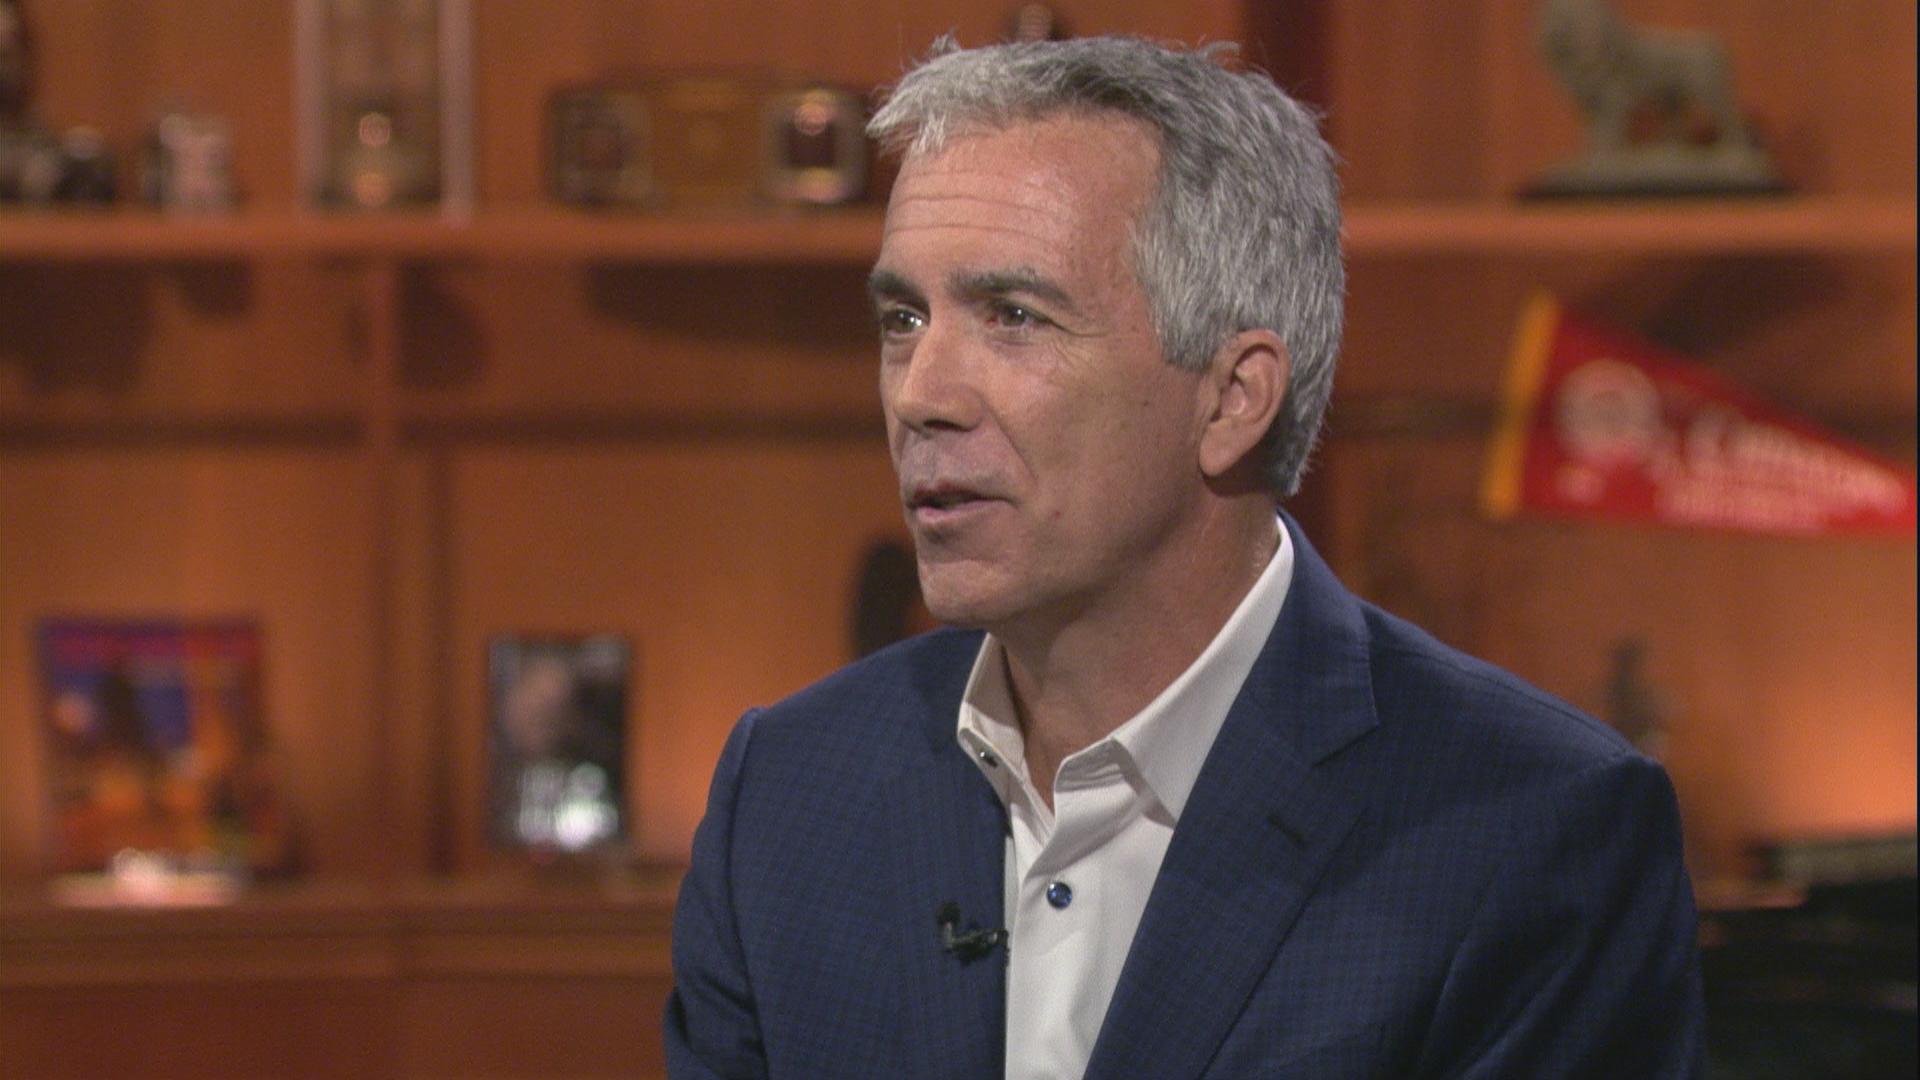 Former U.S. Rep. Joe Walsh appears on “Chicago Tonight” on Aug. 19, 2019.